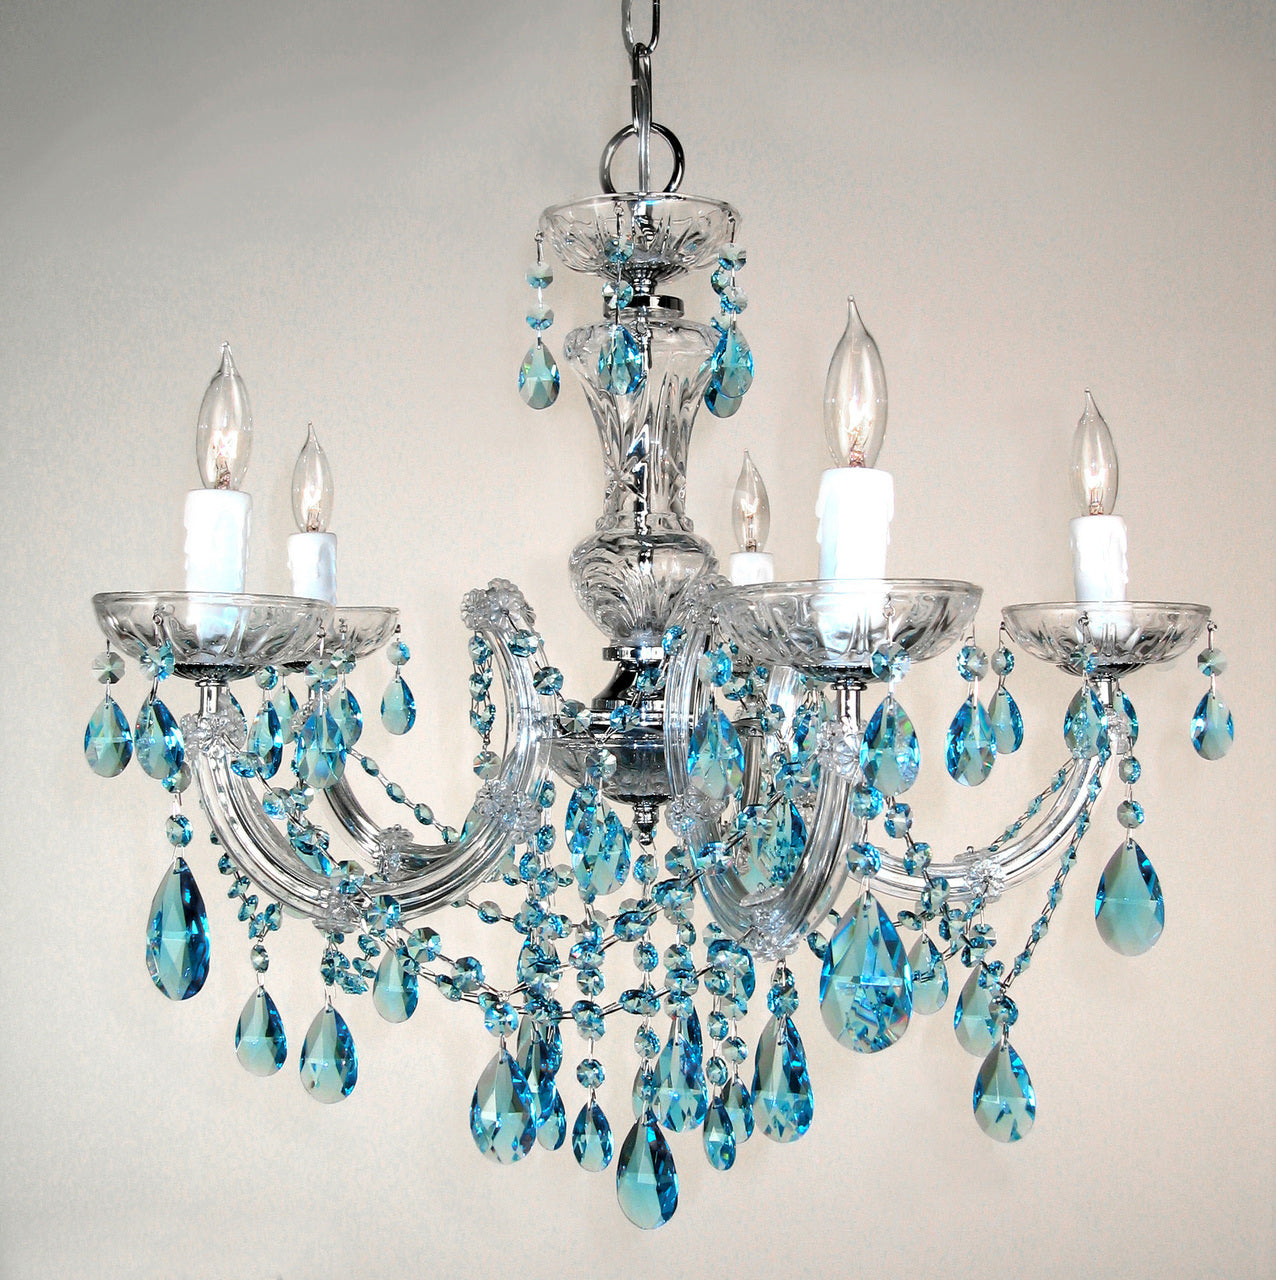 Classic Lighting 8345 CH CSA Rialto Traditional Crystal Chandelier in Chrome